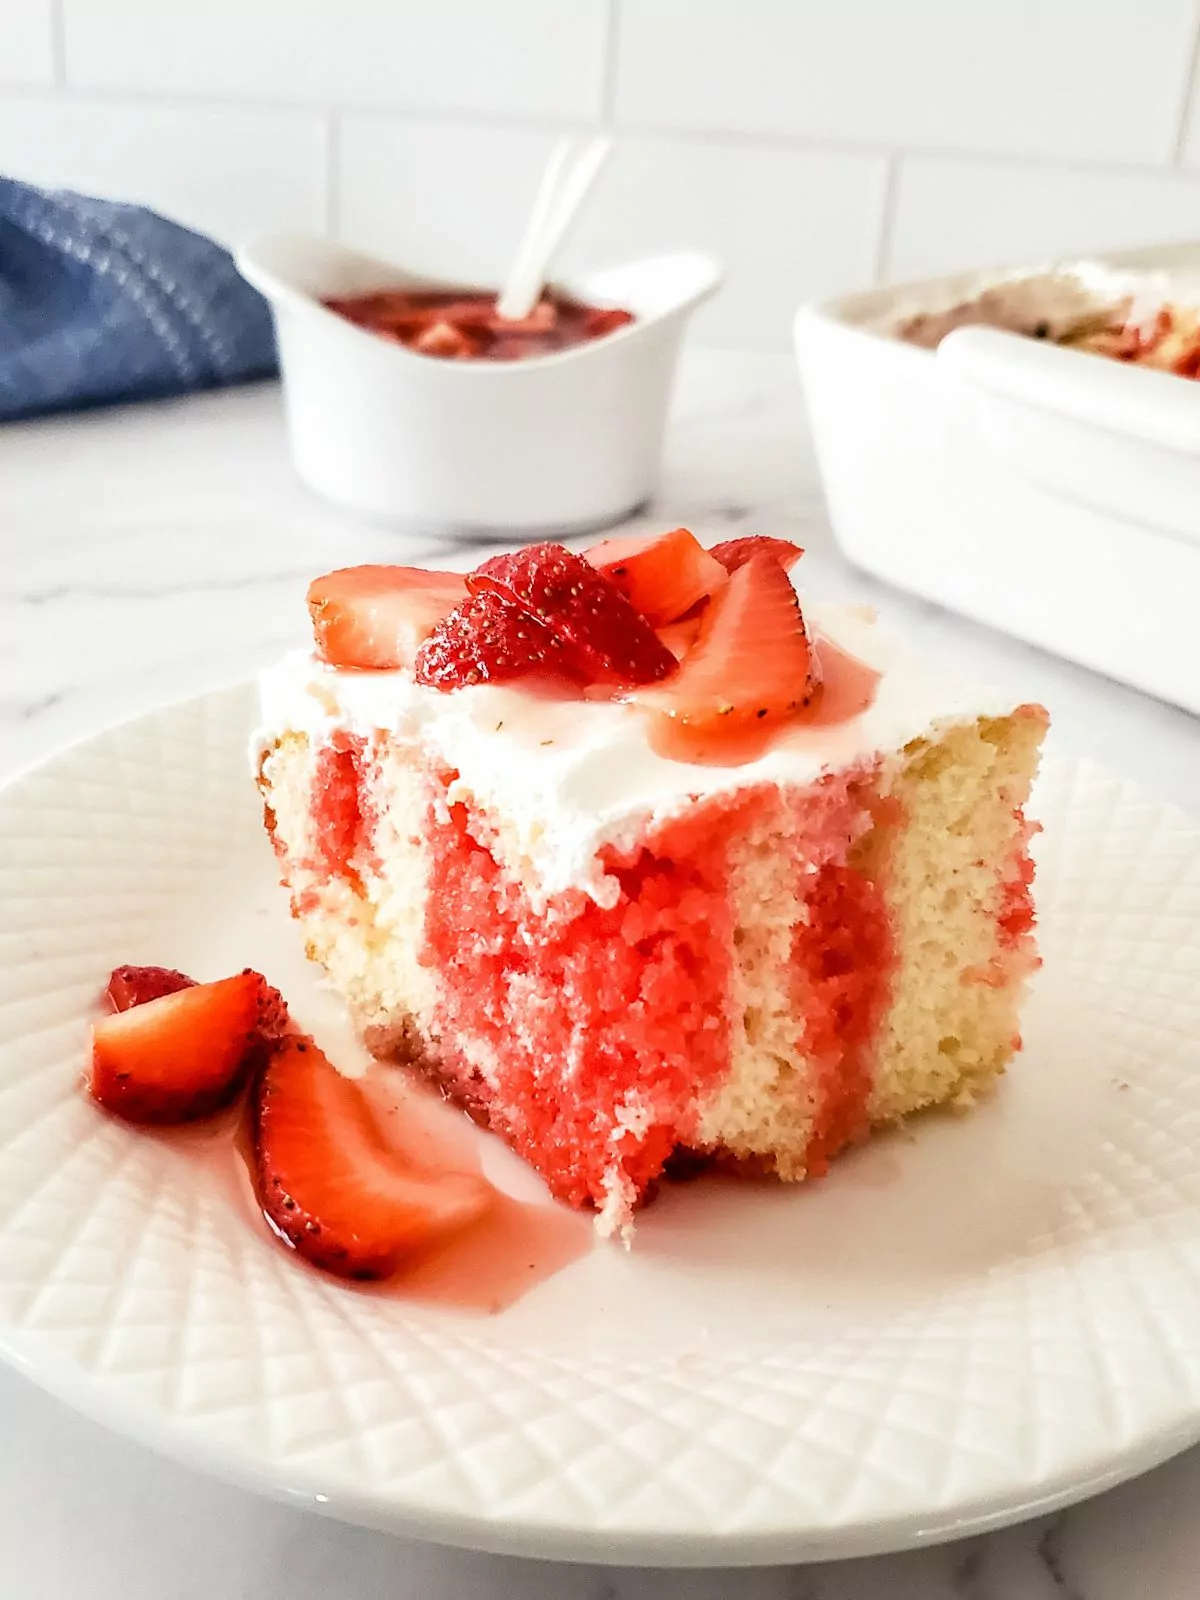 Slice of strawberry poke cake with fresh strawberries on top. In the background is a bowl of the strawberry sauce and the rest of the cake in a white dish.